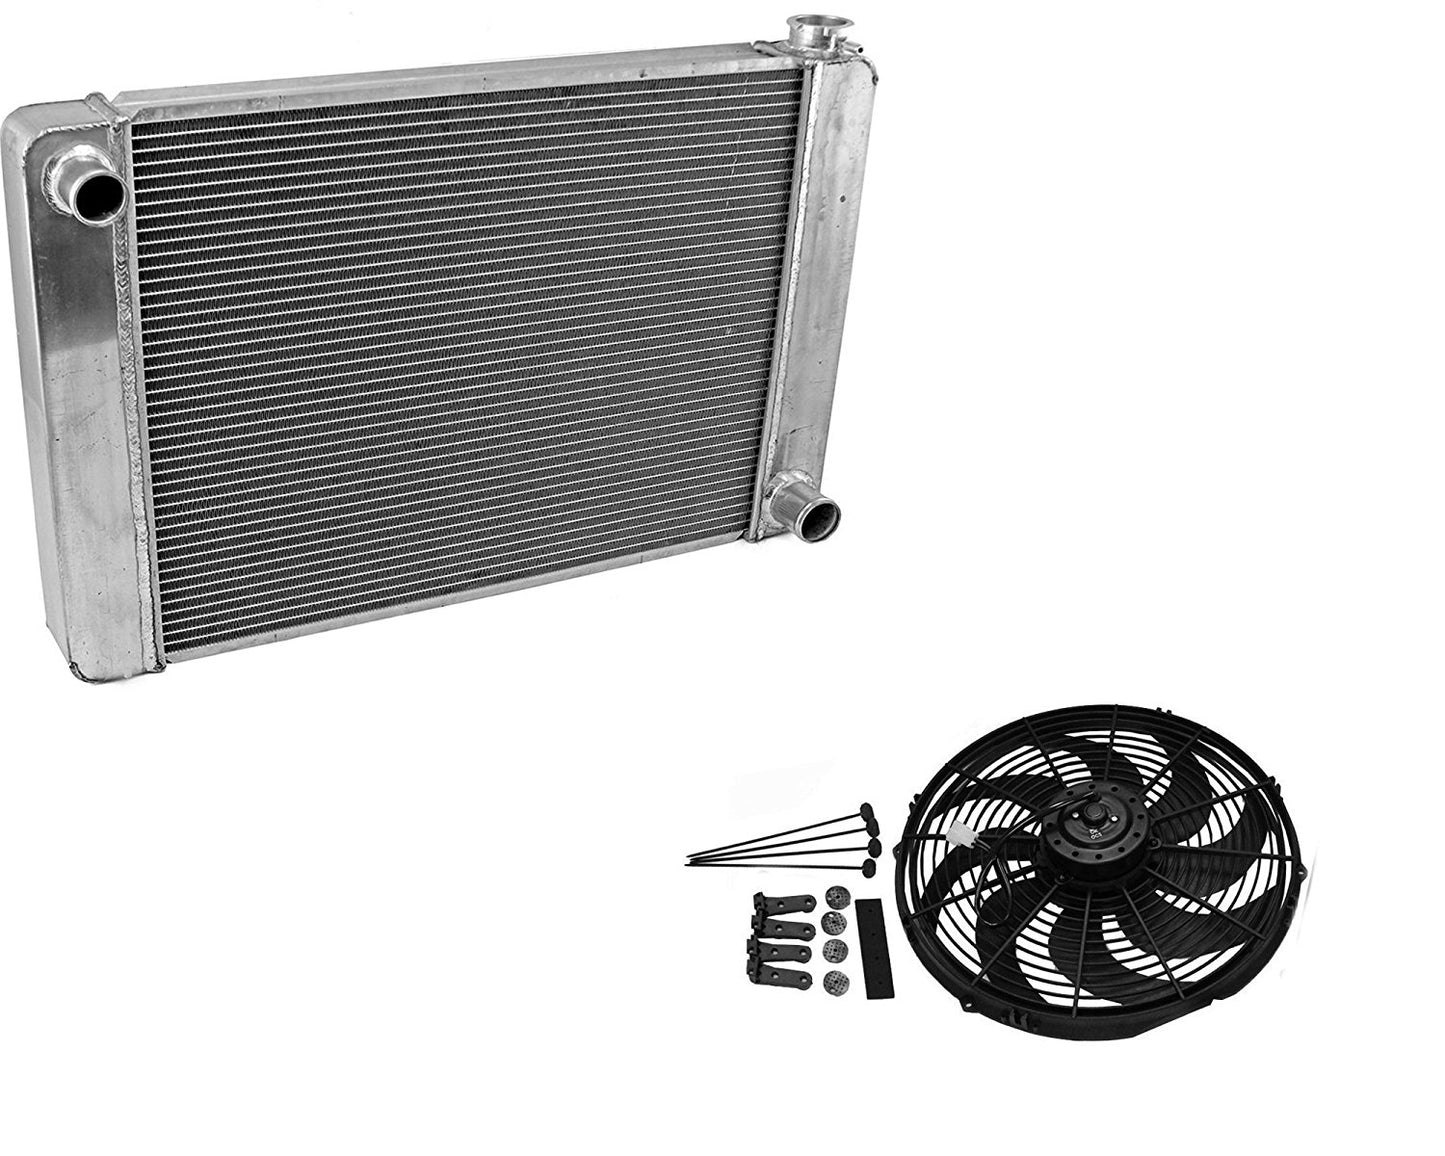 Fabricated Aluminum Radiator 24" x 19" x 3" Overall For SBC BBC Chevy GM &14" Heavy Duty Wide Curved Blade Fan